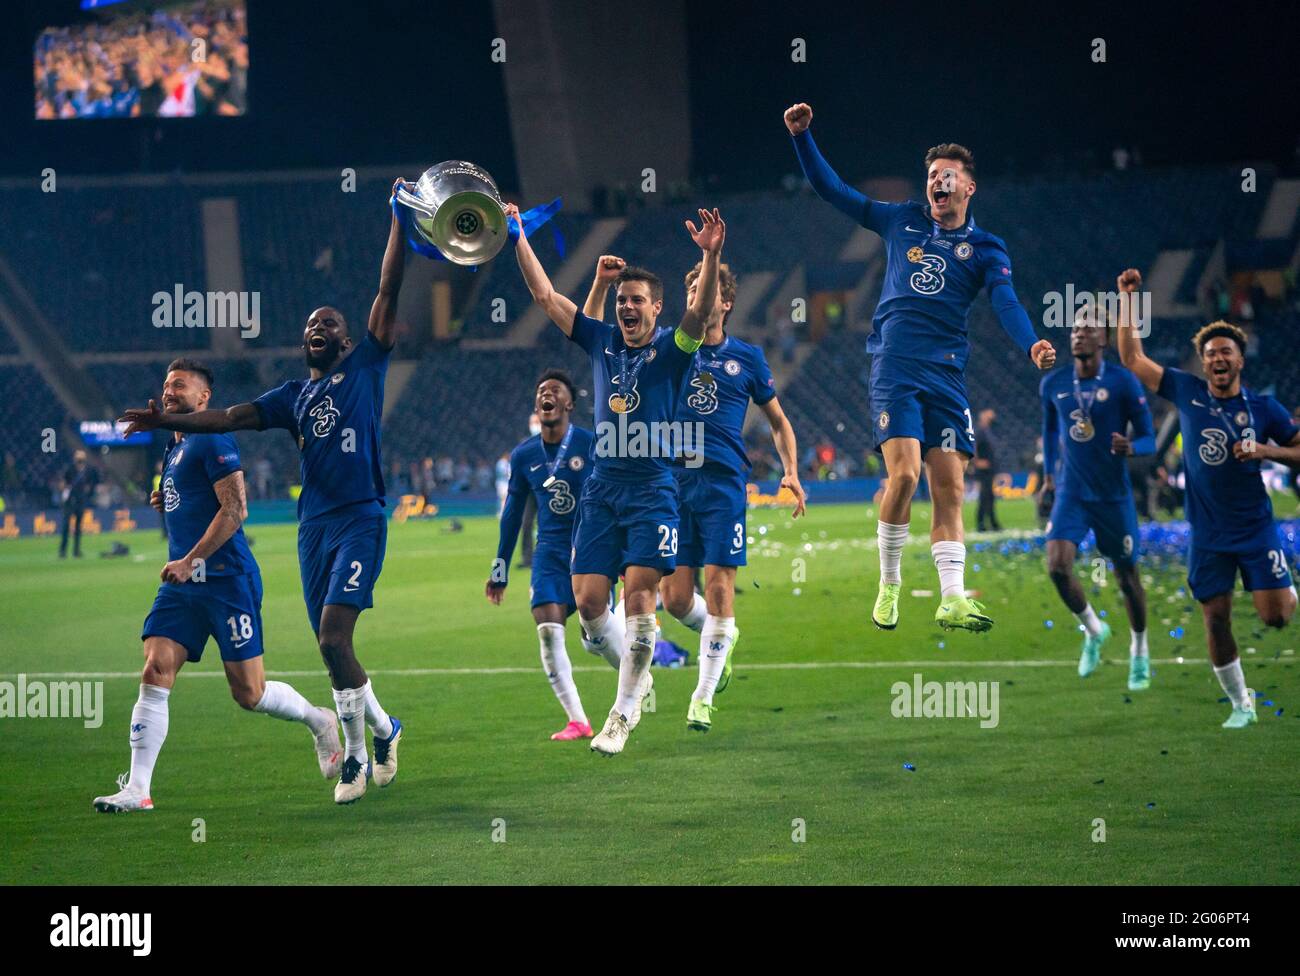 Ryal Quay, UK. 29th May, 2021. Csar Azpilicueta (28) & Antonio RŸdiger (2) with Chelsea teammates and the winning trophy following the UEFA Champions League Final match between Manchester City and Chelsea at The Est‡dio do Drag‹o, Porto, Portugal on 29 May 2021. Photo by Andy Rowland. Credit: PRiME Media Images/Alamy Live News Stock Photo